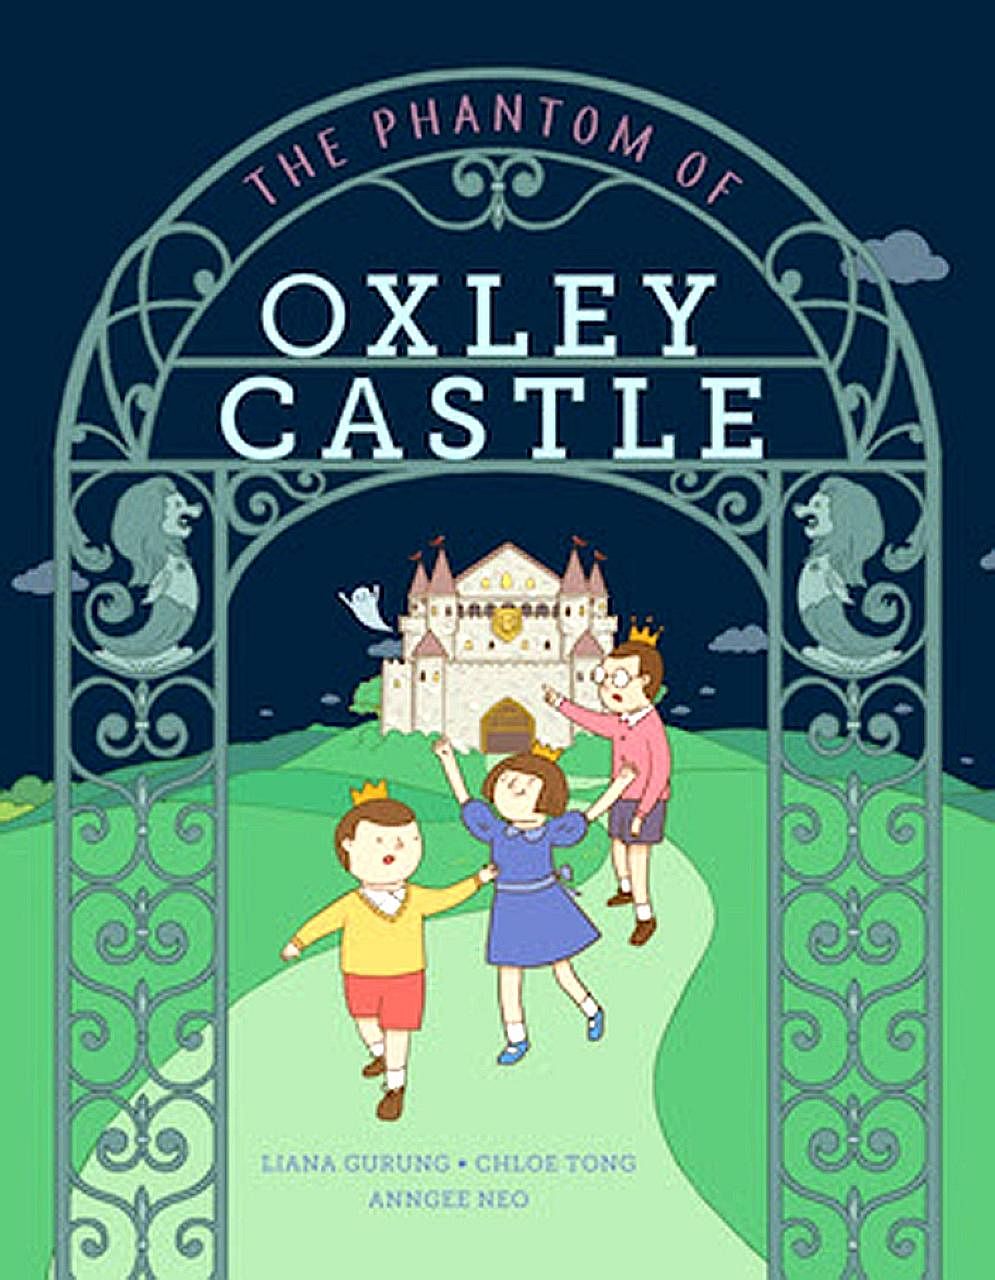 The book is about a grand castle with 38 rooms, located on a tropical island. Two young princes, a princess and their pesky butler named OB Markus live in the castle.